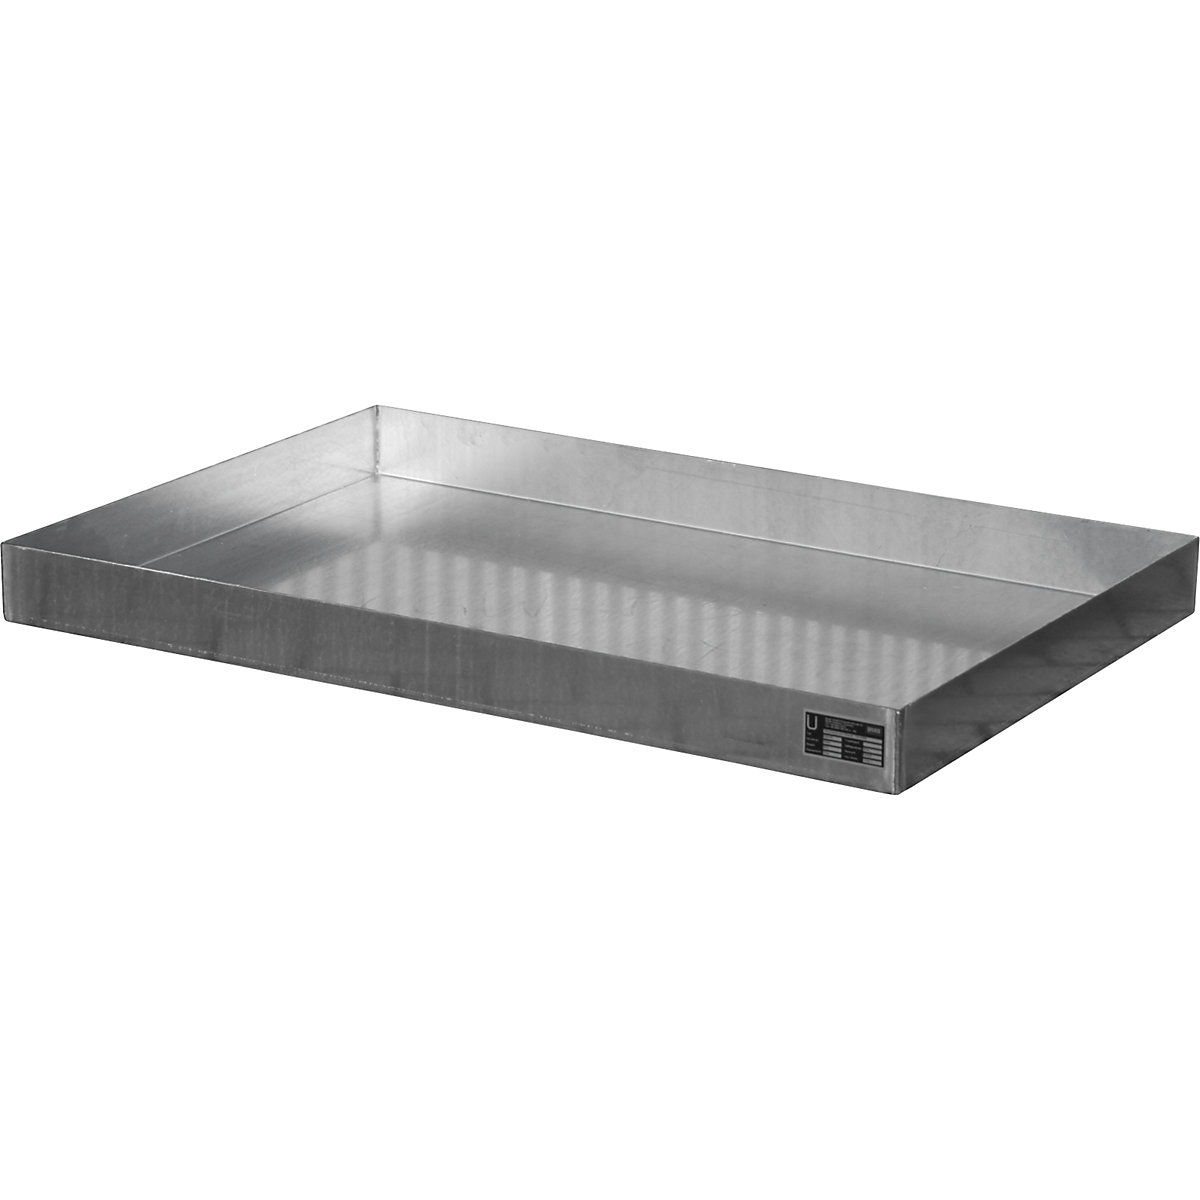 Stainless steel pallet tray – eurokraft pro, for small containers, 60 l, LxWxH 1200 x 800 x 100 mm-3